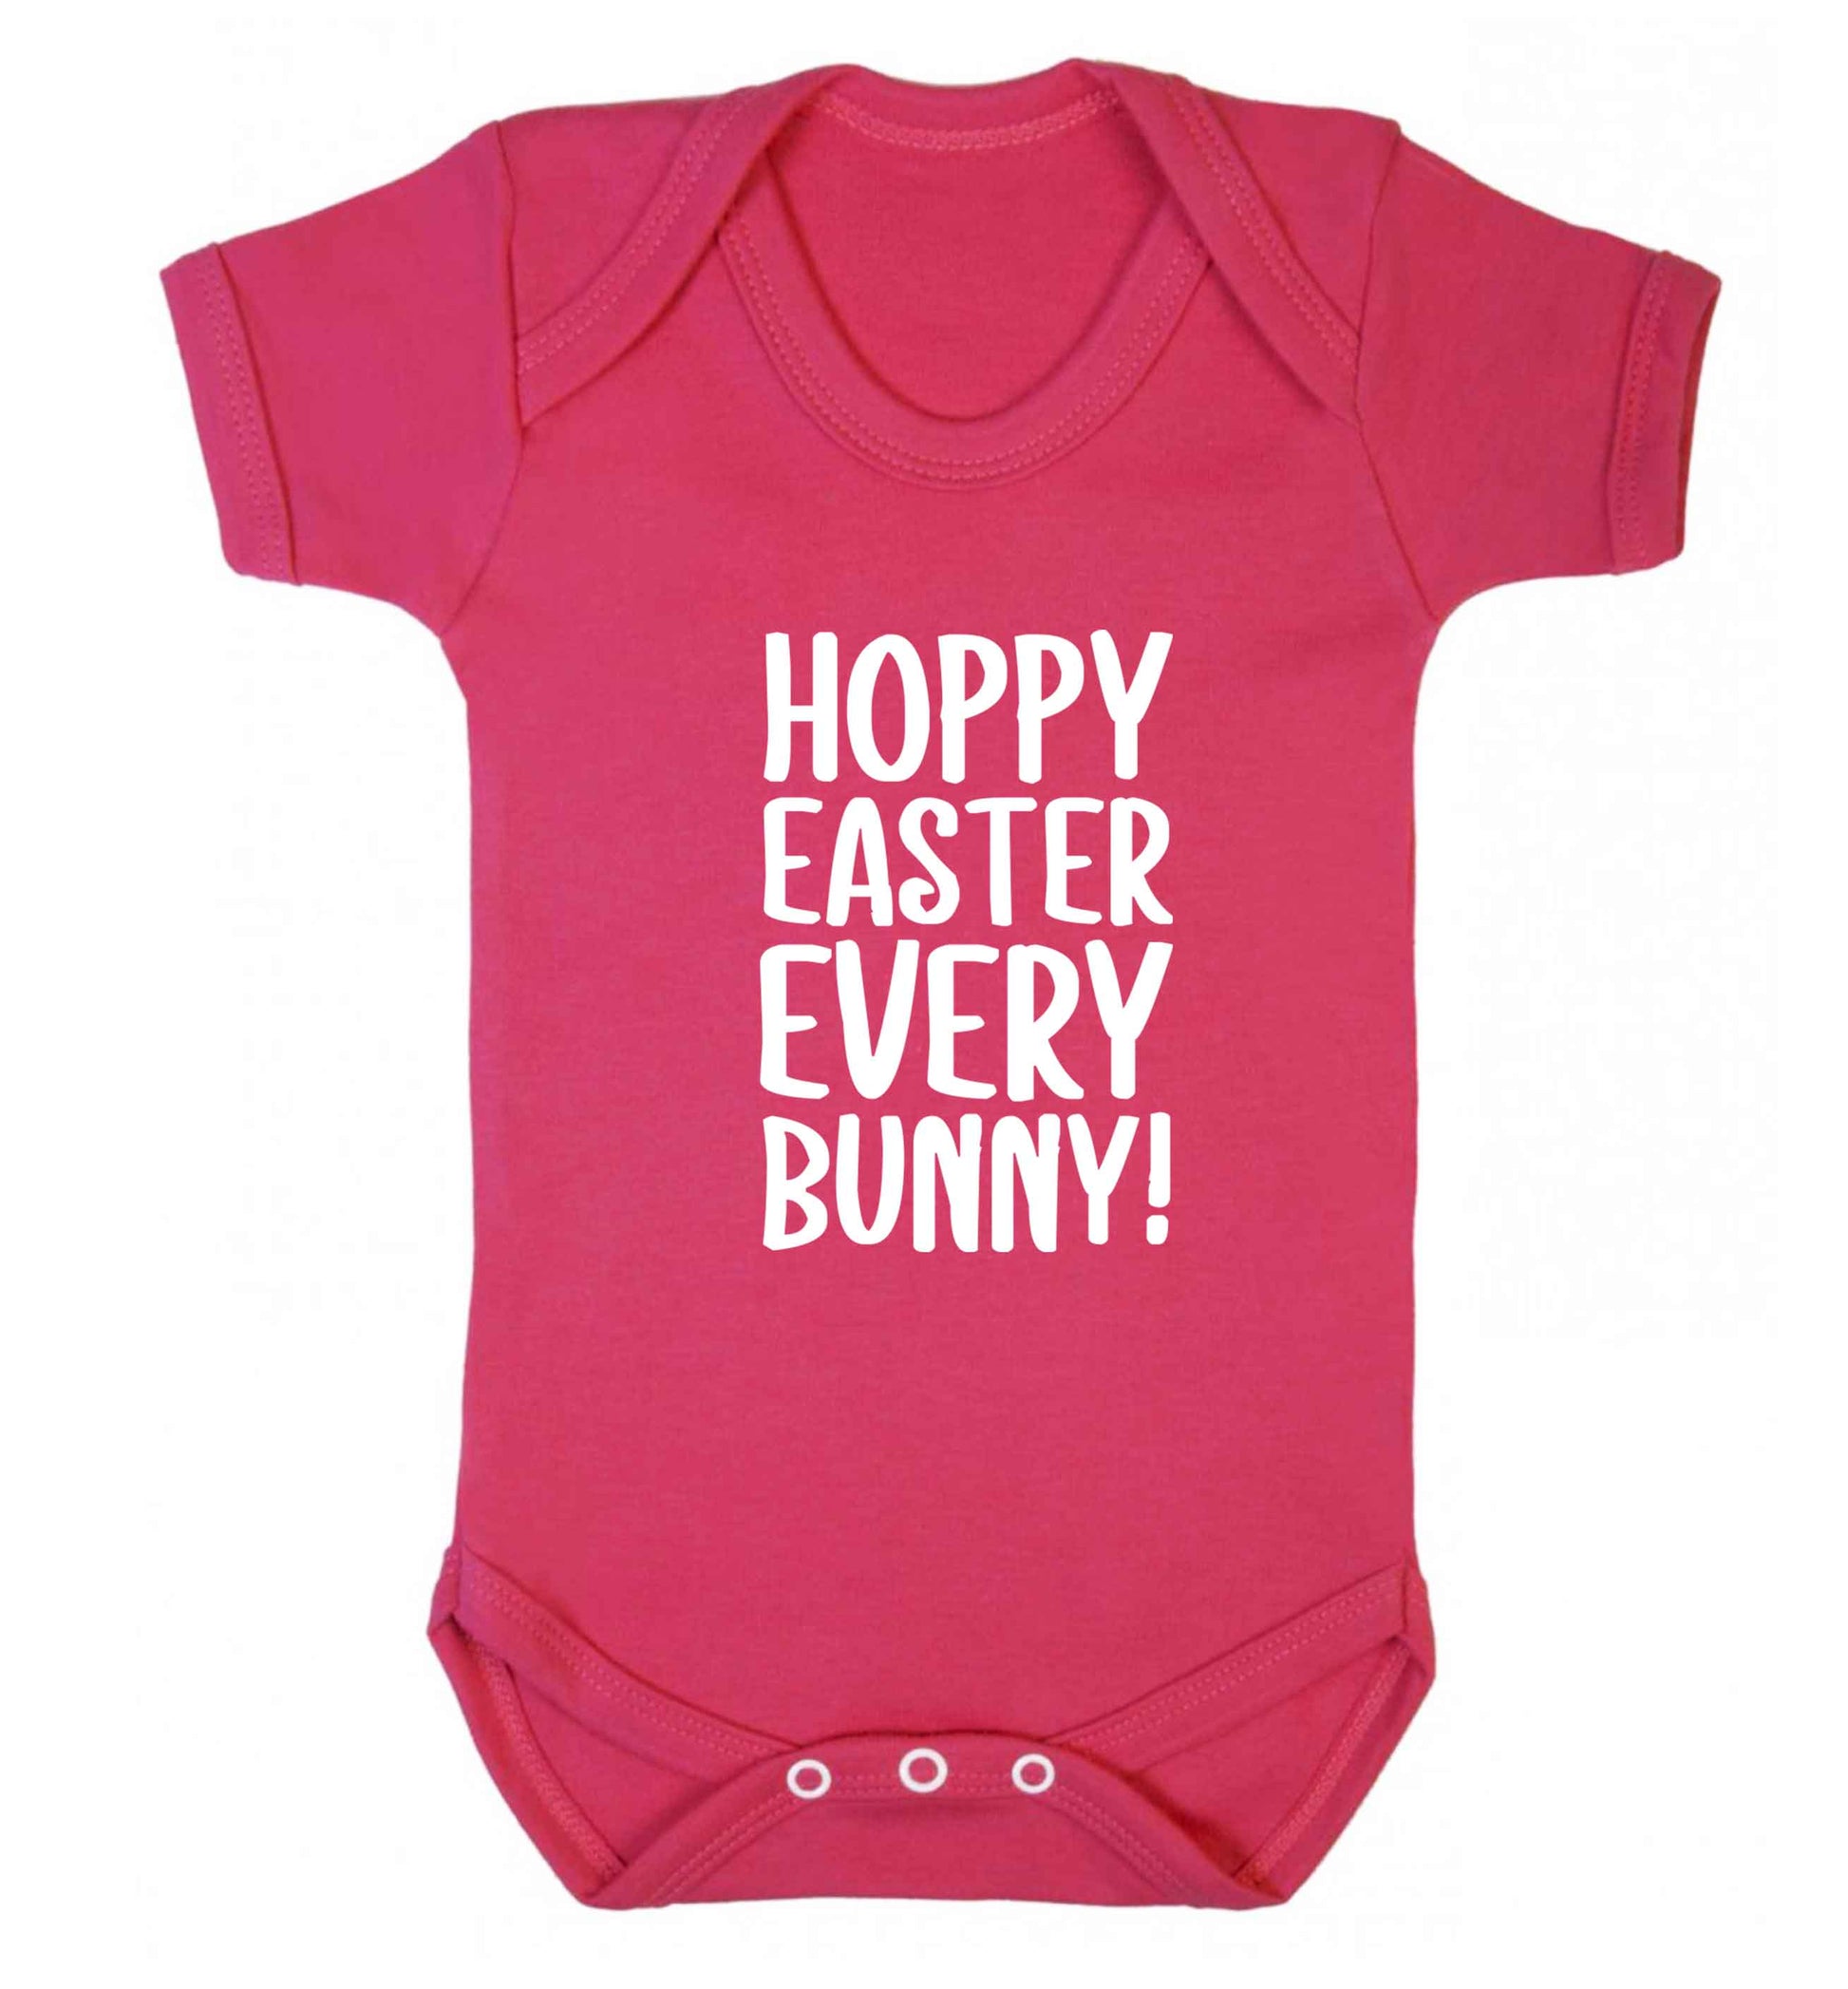 Hoppy Easter every bunny! baby vest dark pink 18-24 months